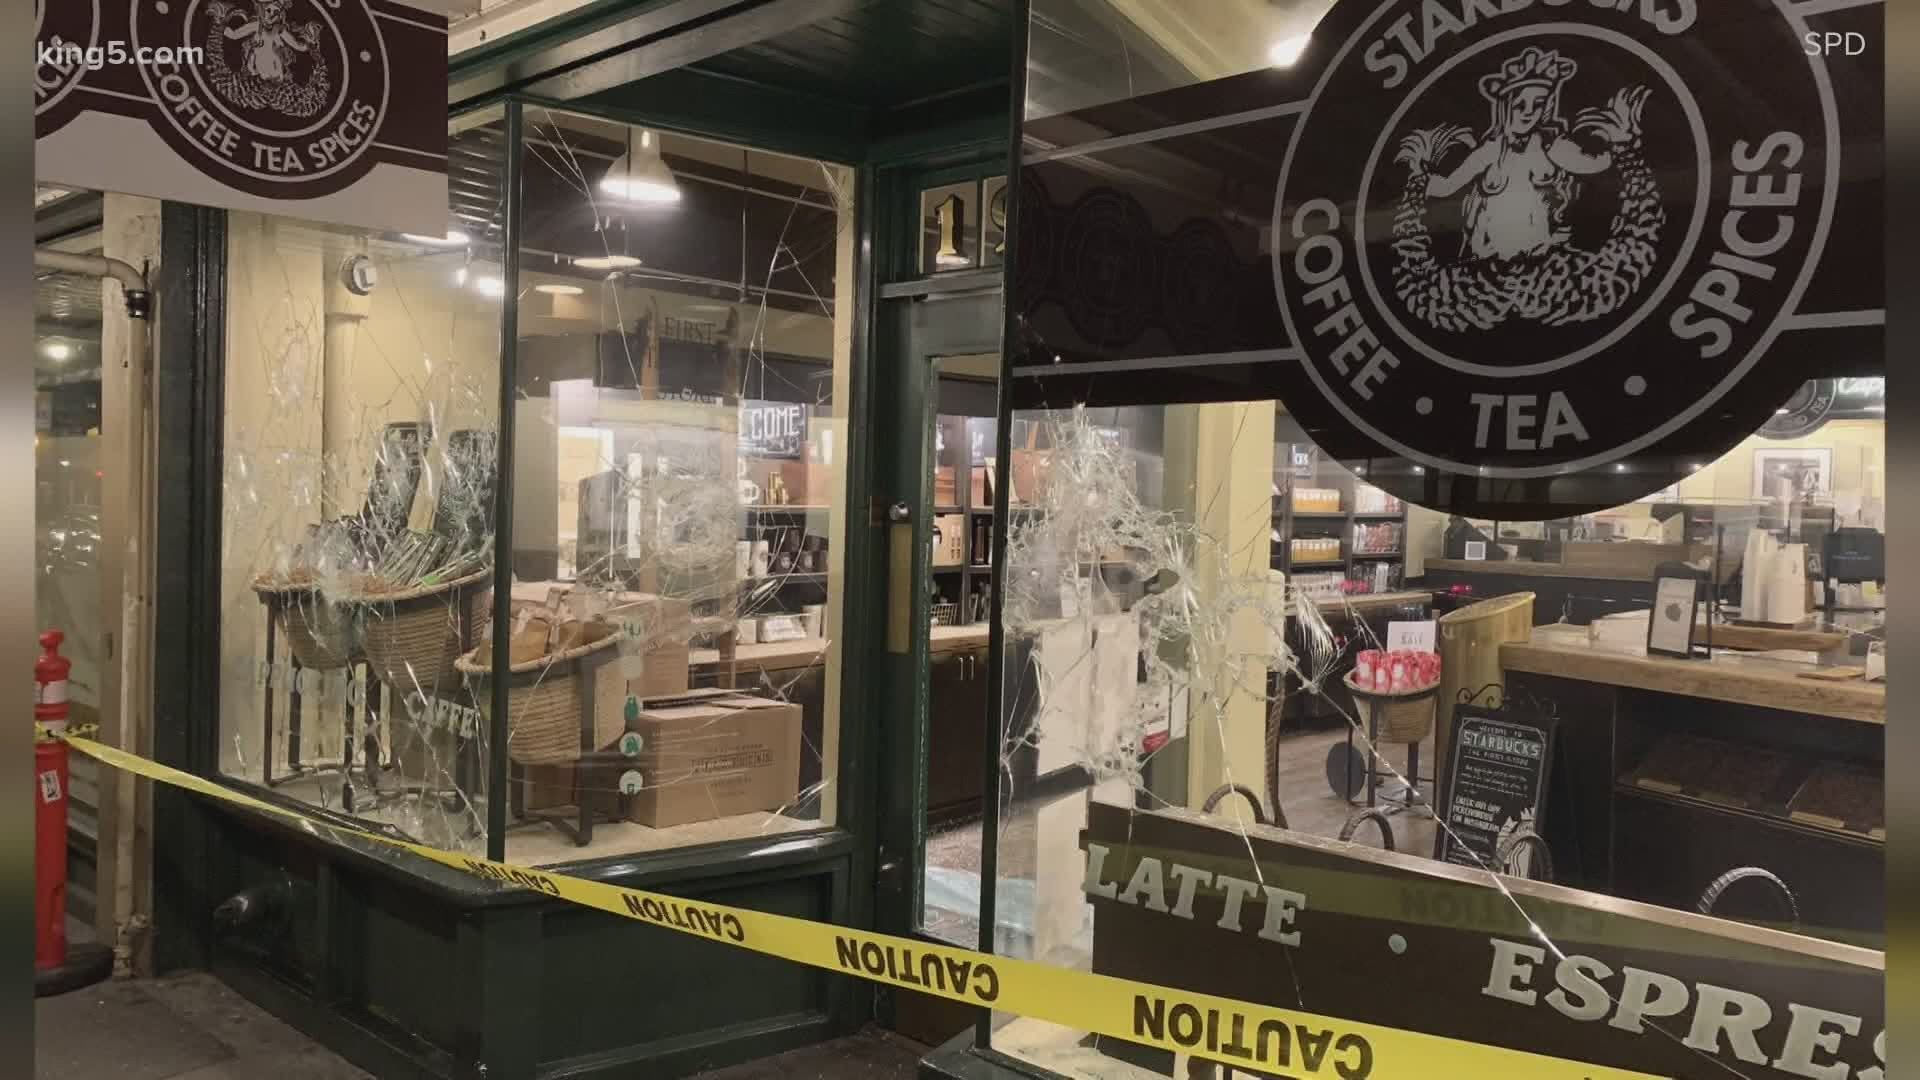 Several businesses, including the original Starbucks at Pike Place Market, were damaged and vandalized during protests Wednesday night.